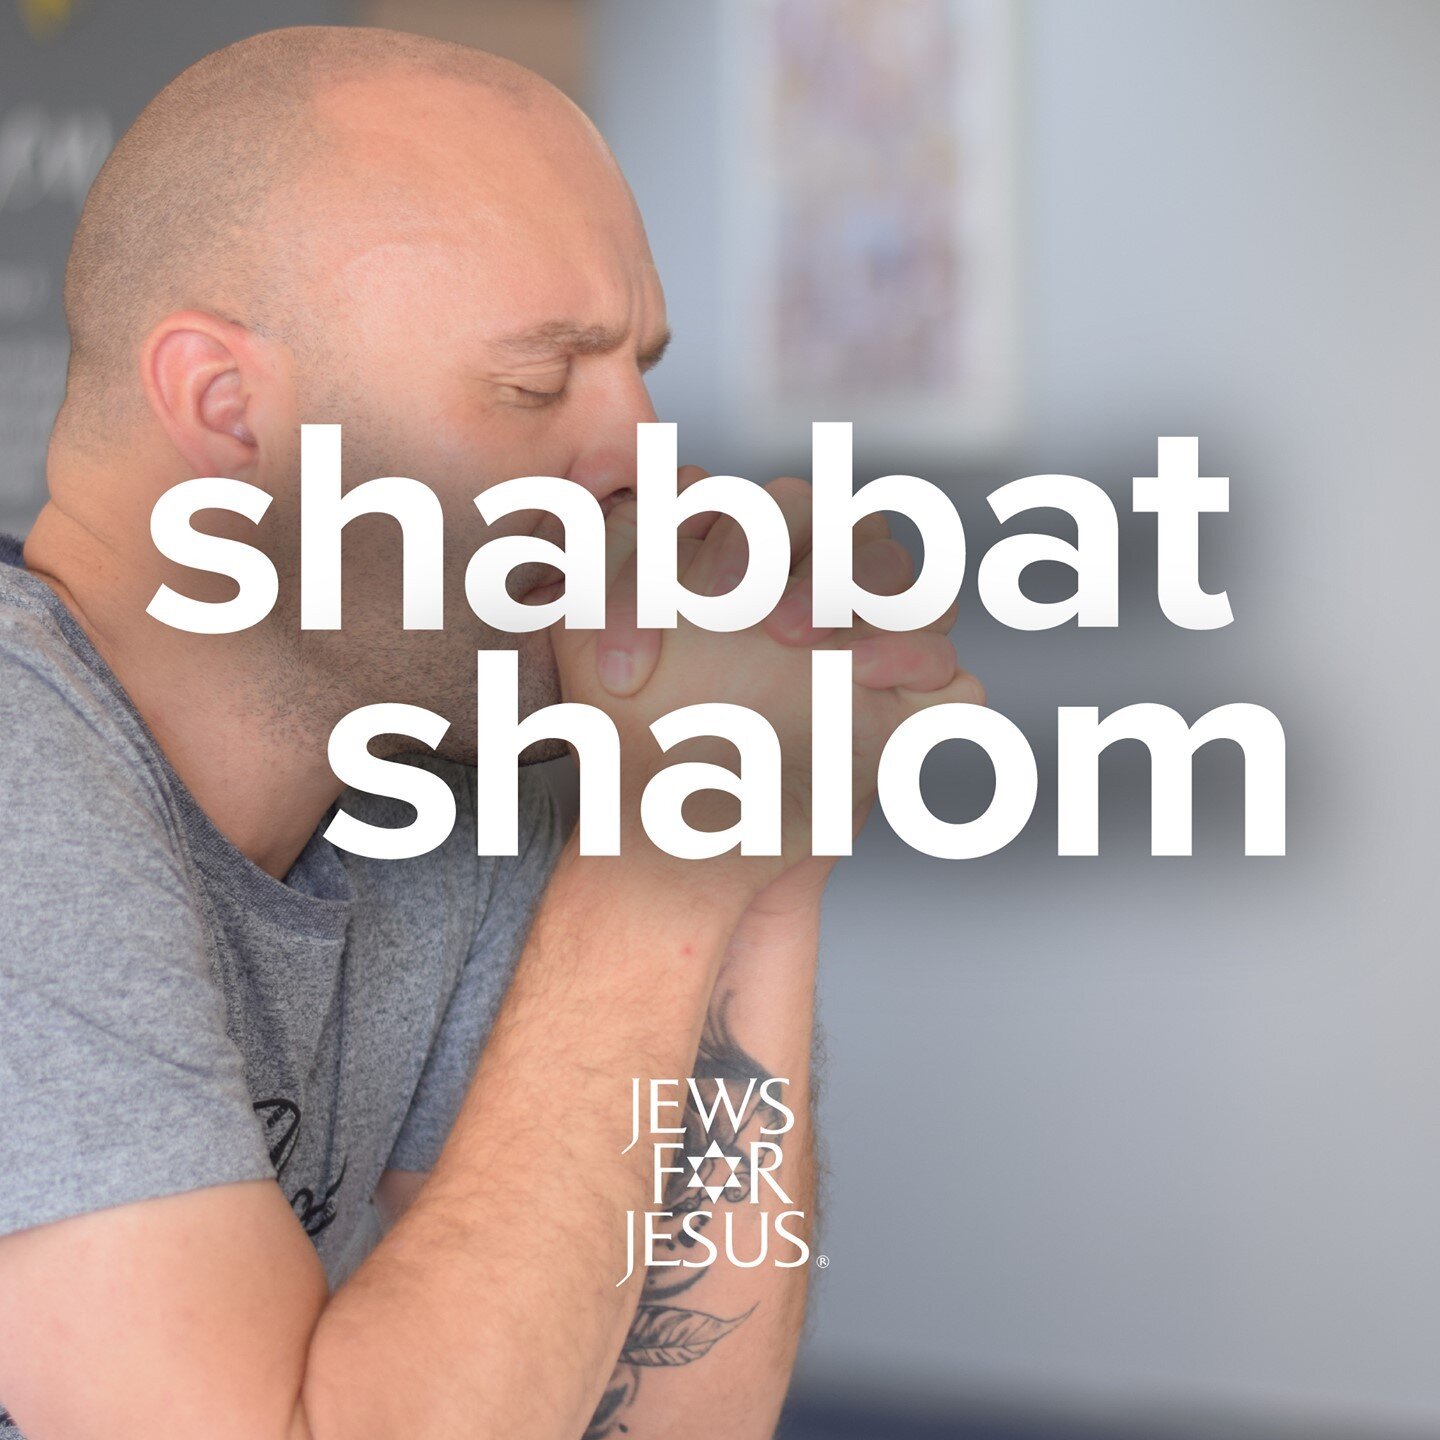 Shabbat Shalom, South Africa. We pray it's a peaceful time for you and your loved ones.